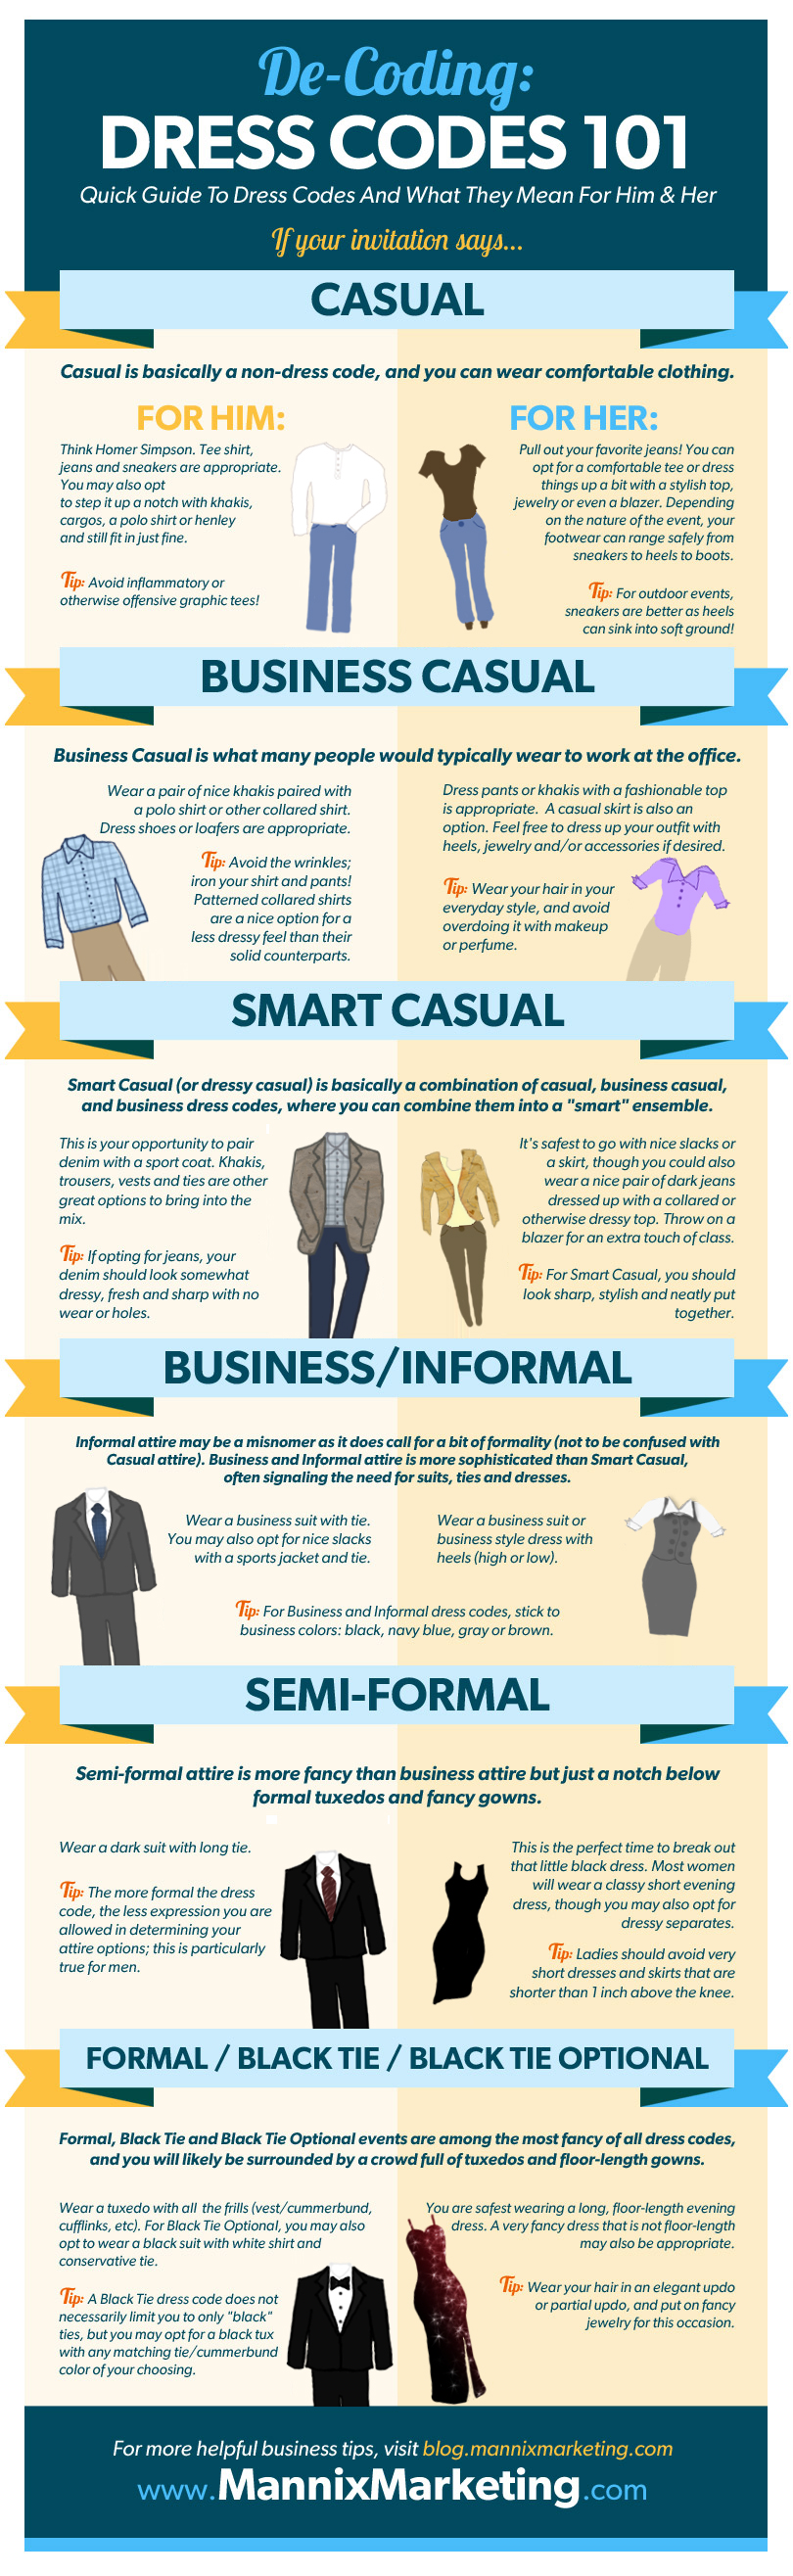 Here's The Smart Casual Dress Code Guide For Women